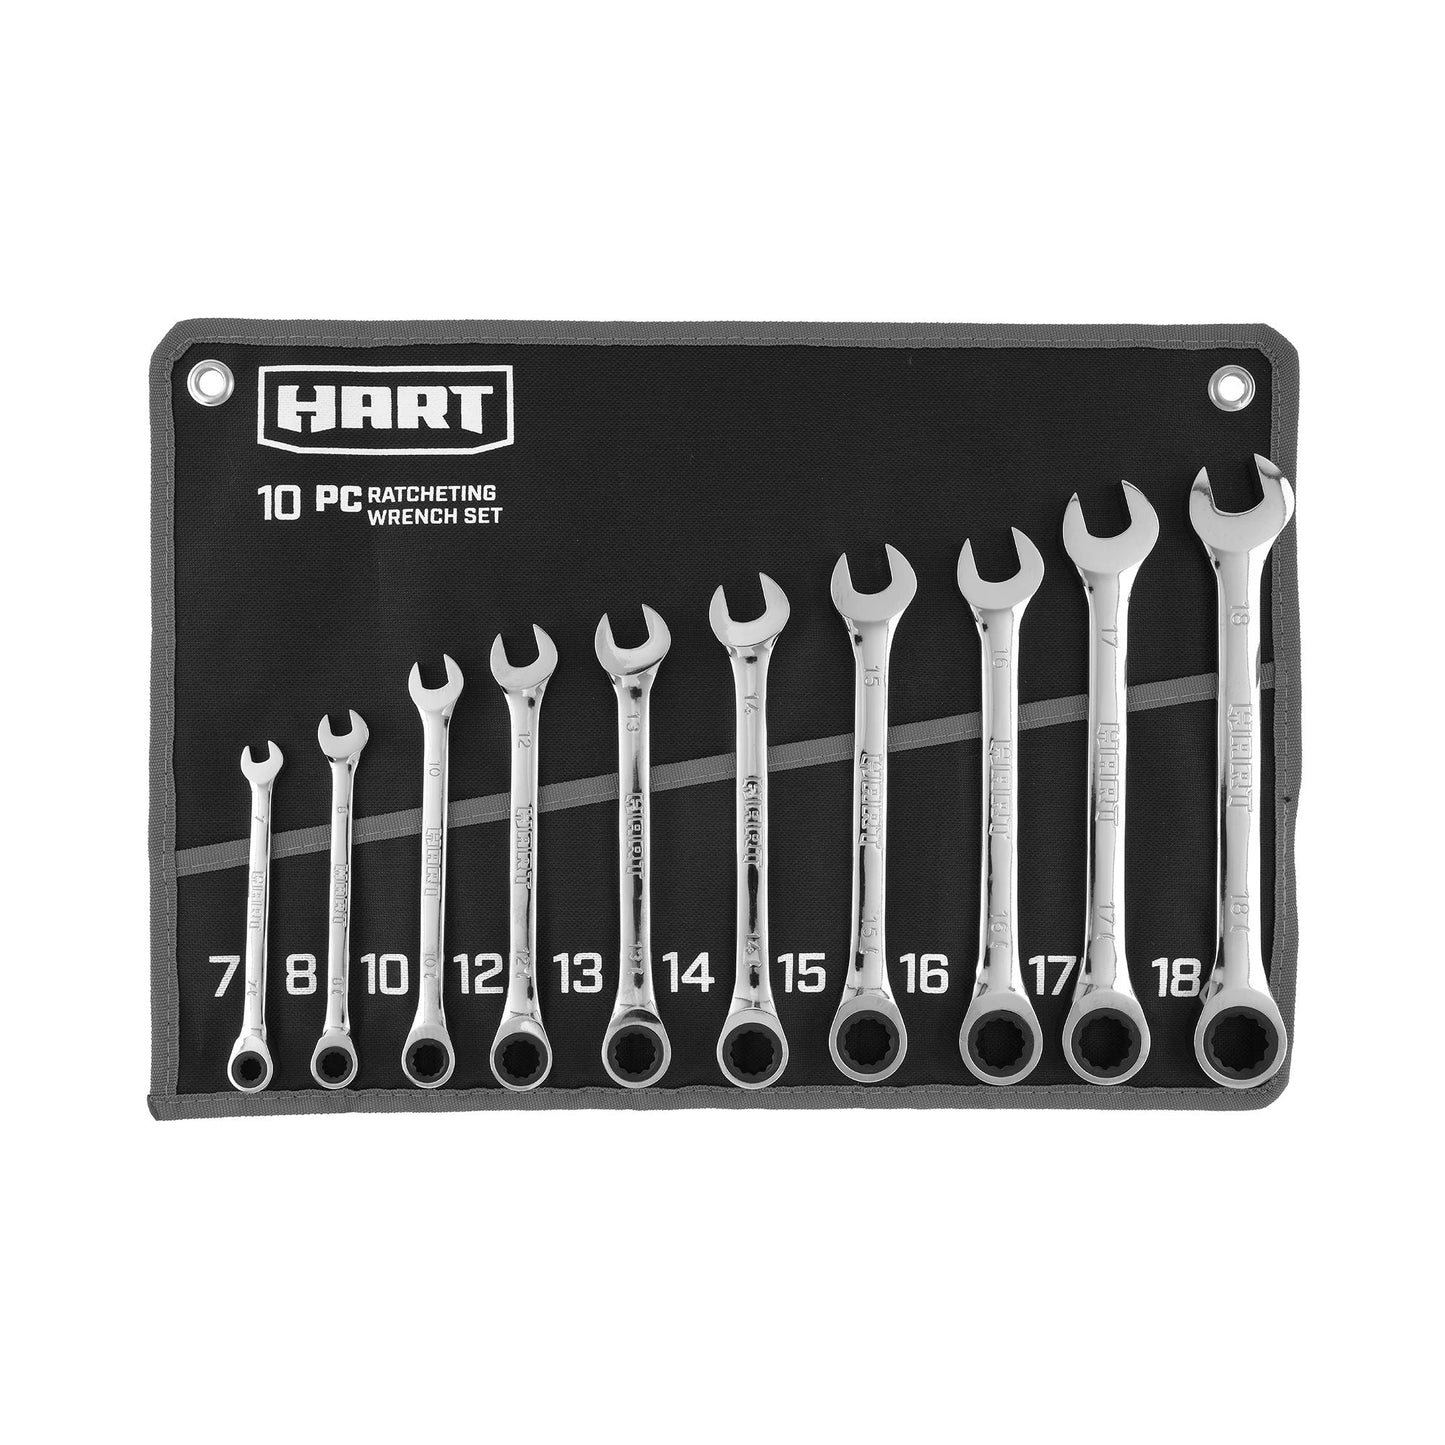 10 PC MM Ratcheting Wrench Set